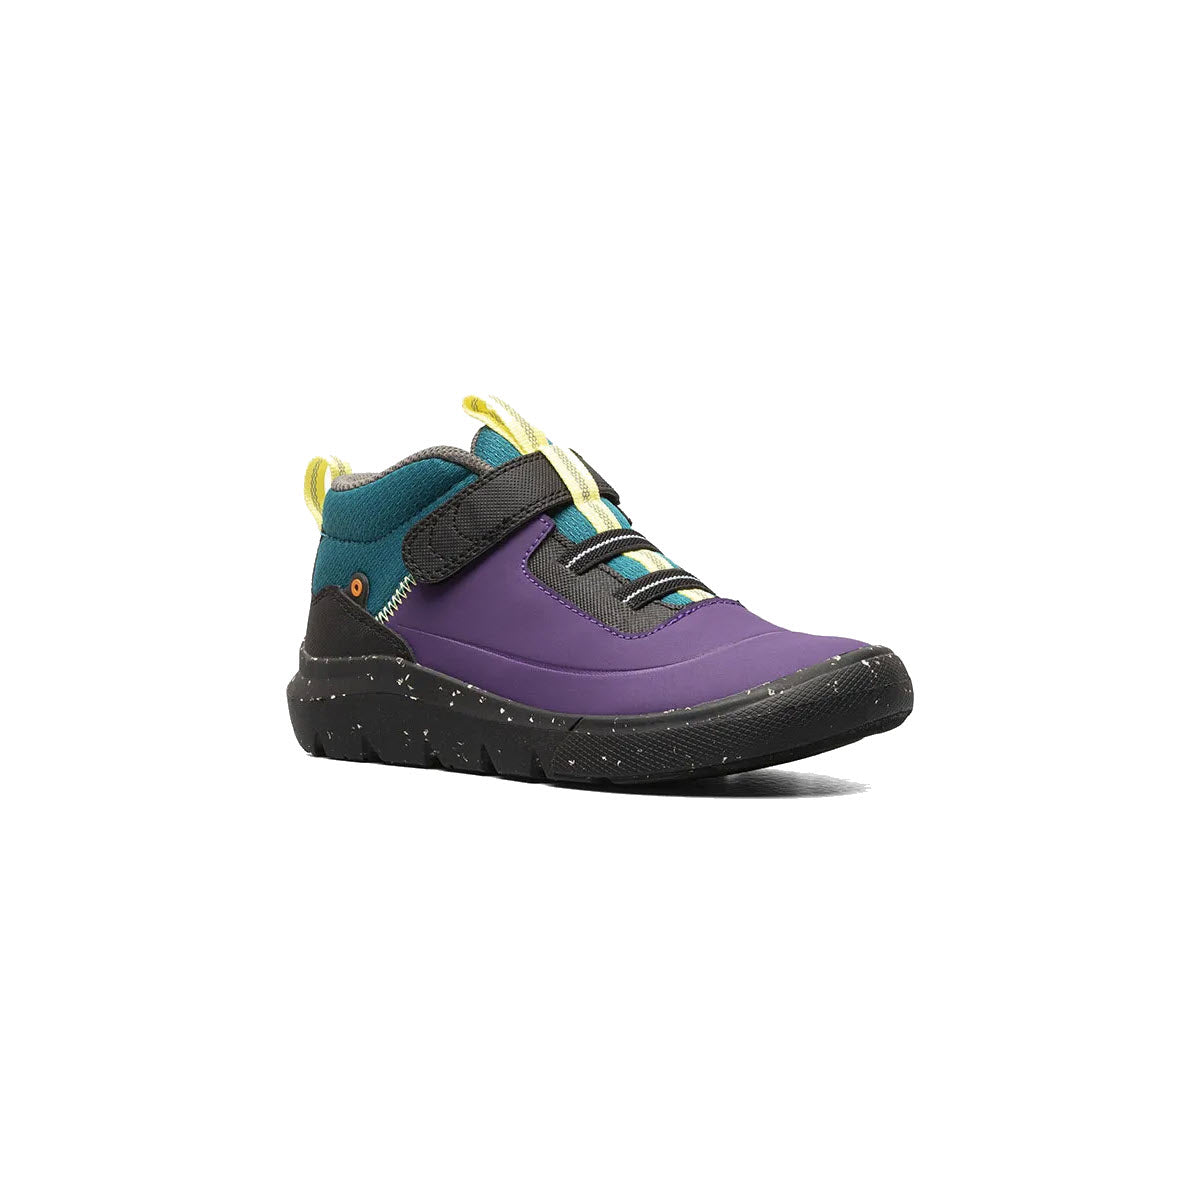 Child&#39;s BOGS SKYLINE KICKER MID PURPLE MULTI - K hiking boot isolated on a white background, featuring purple and blue tones with yellow laces and rubber soles.